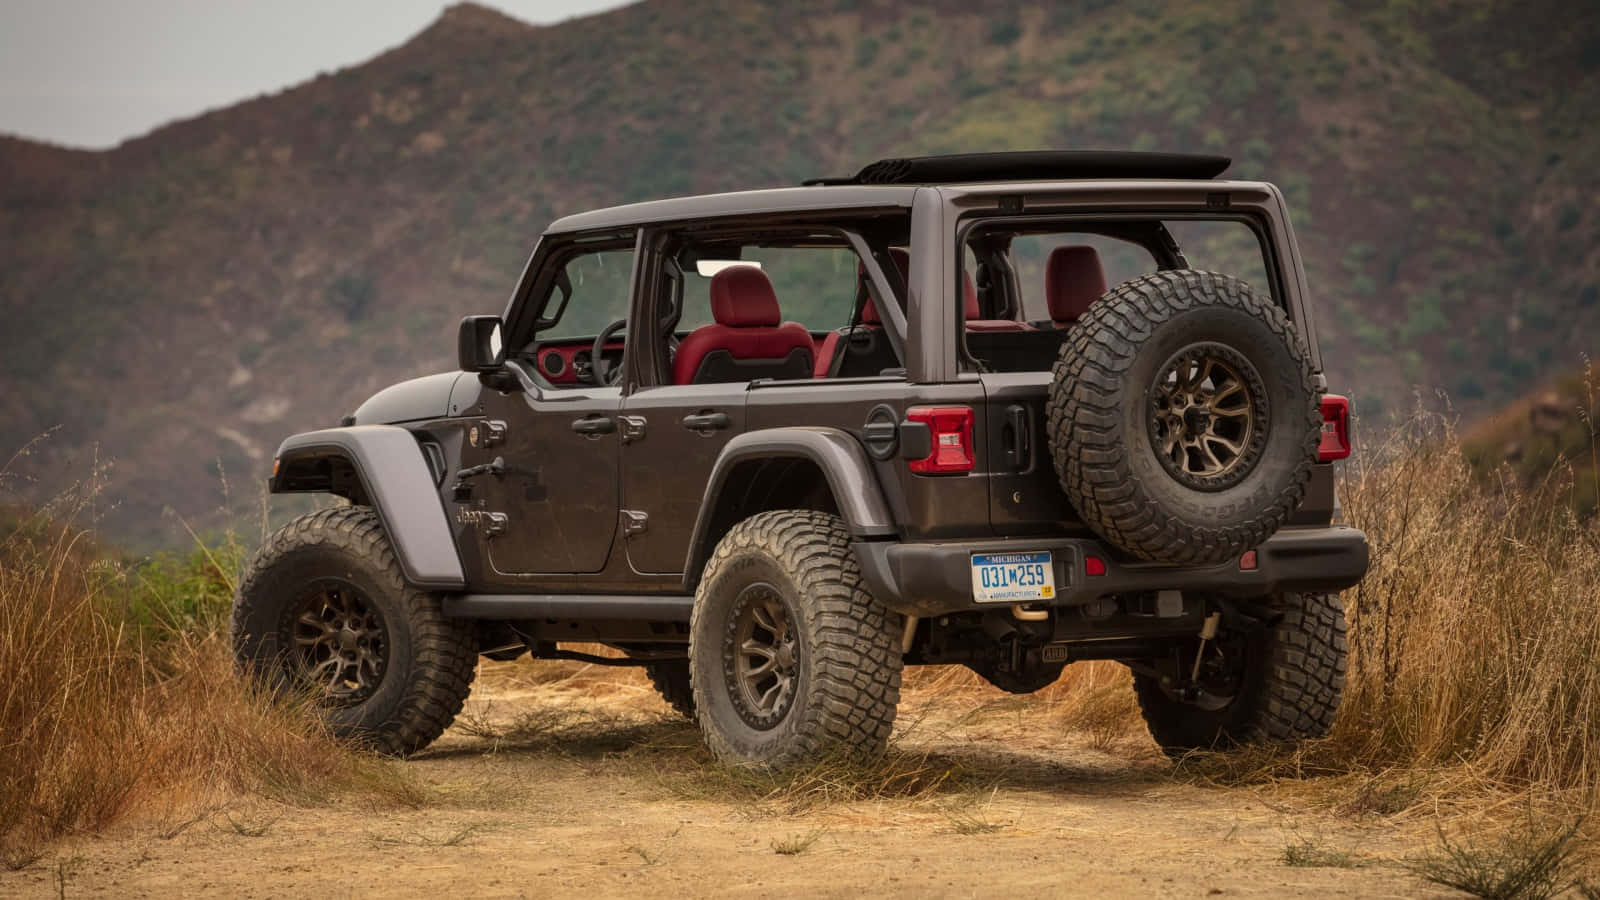 For off-roading enthusiasts, hit the trails with the iconic Jeep Wrangler.